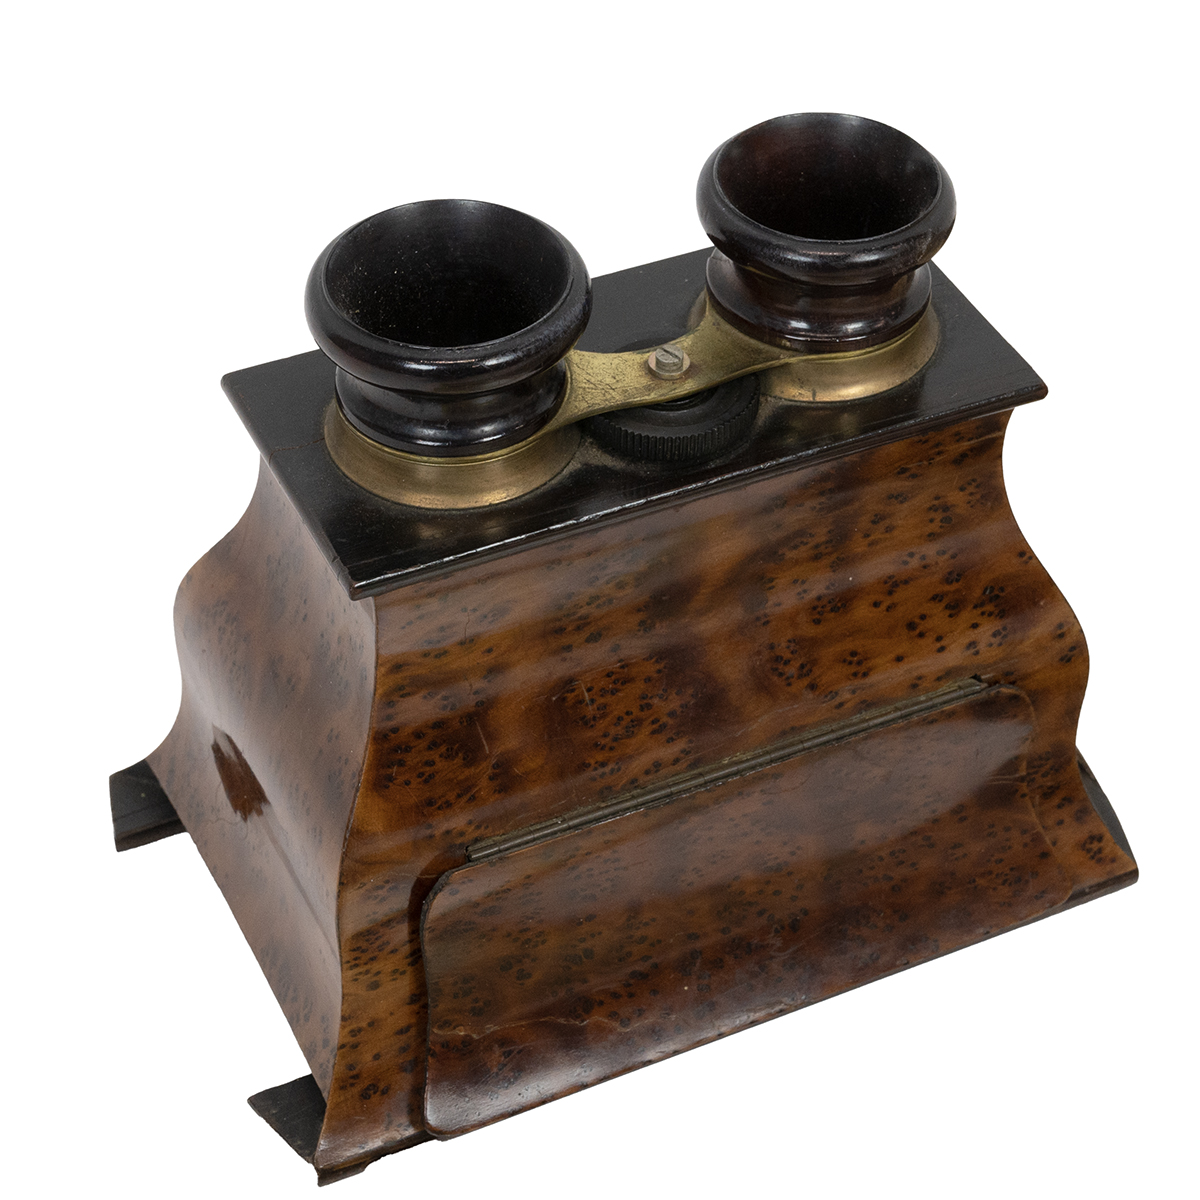 Brewster pattern stereoscope with walnut finish, no maker mark. Together with a quantity of stere... - Image 2 of 4